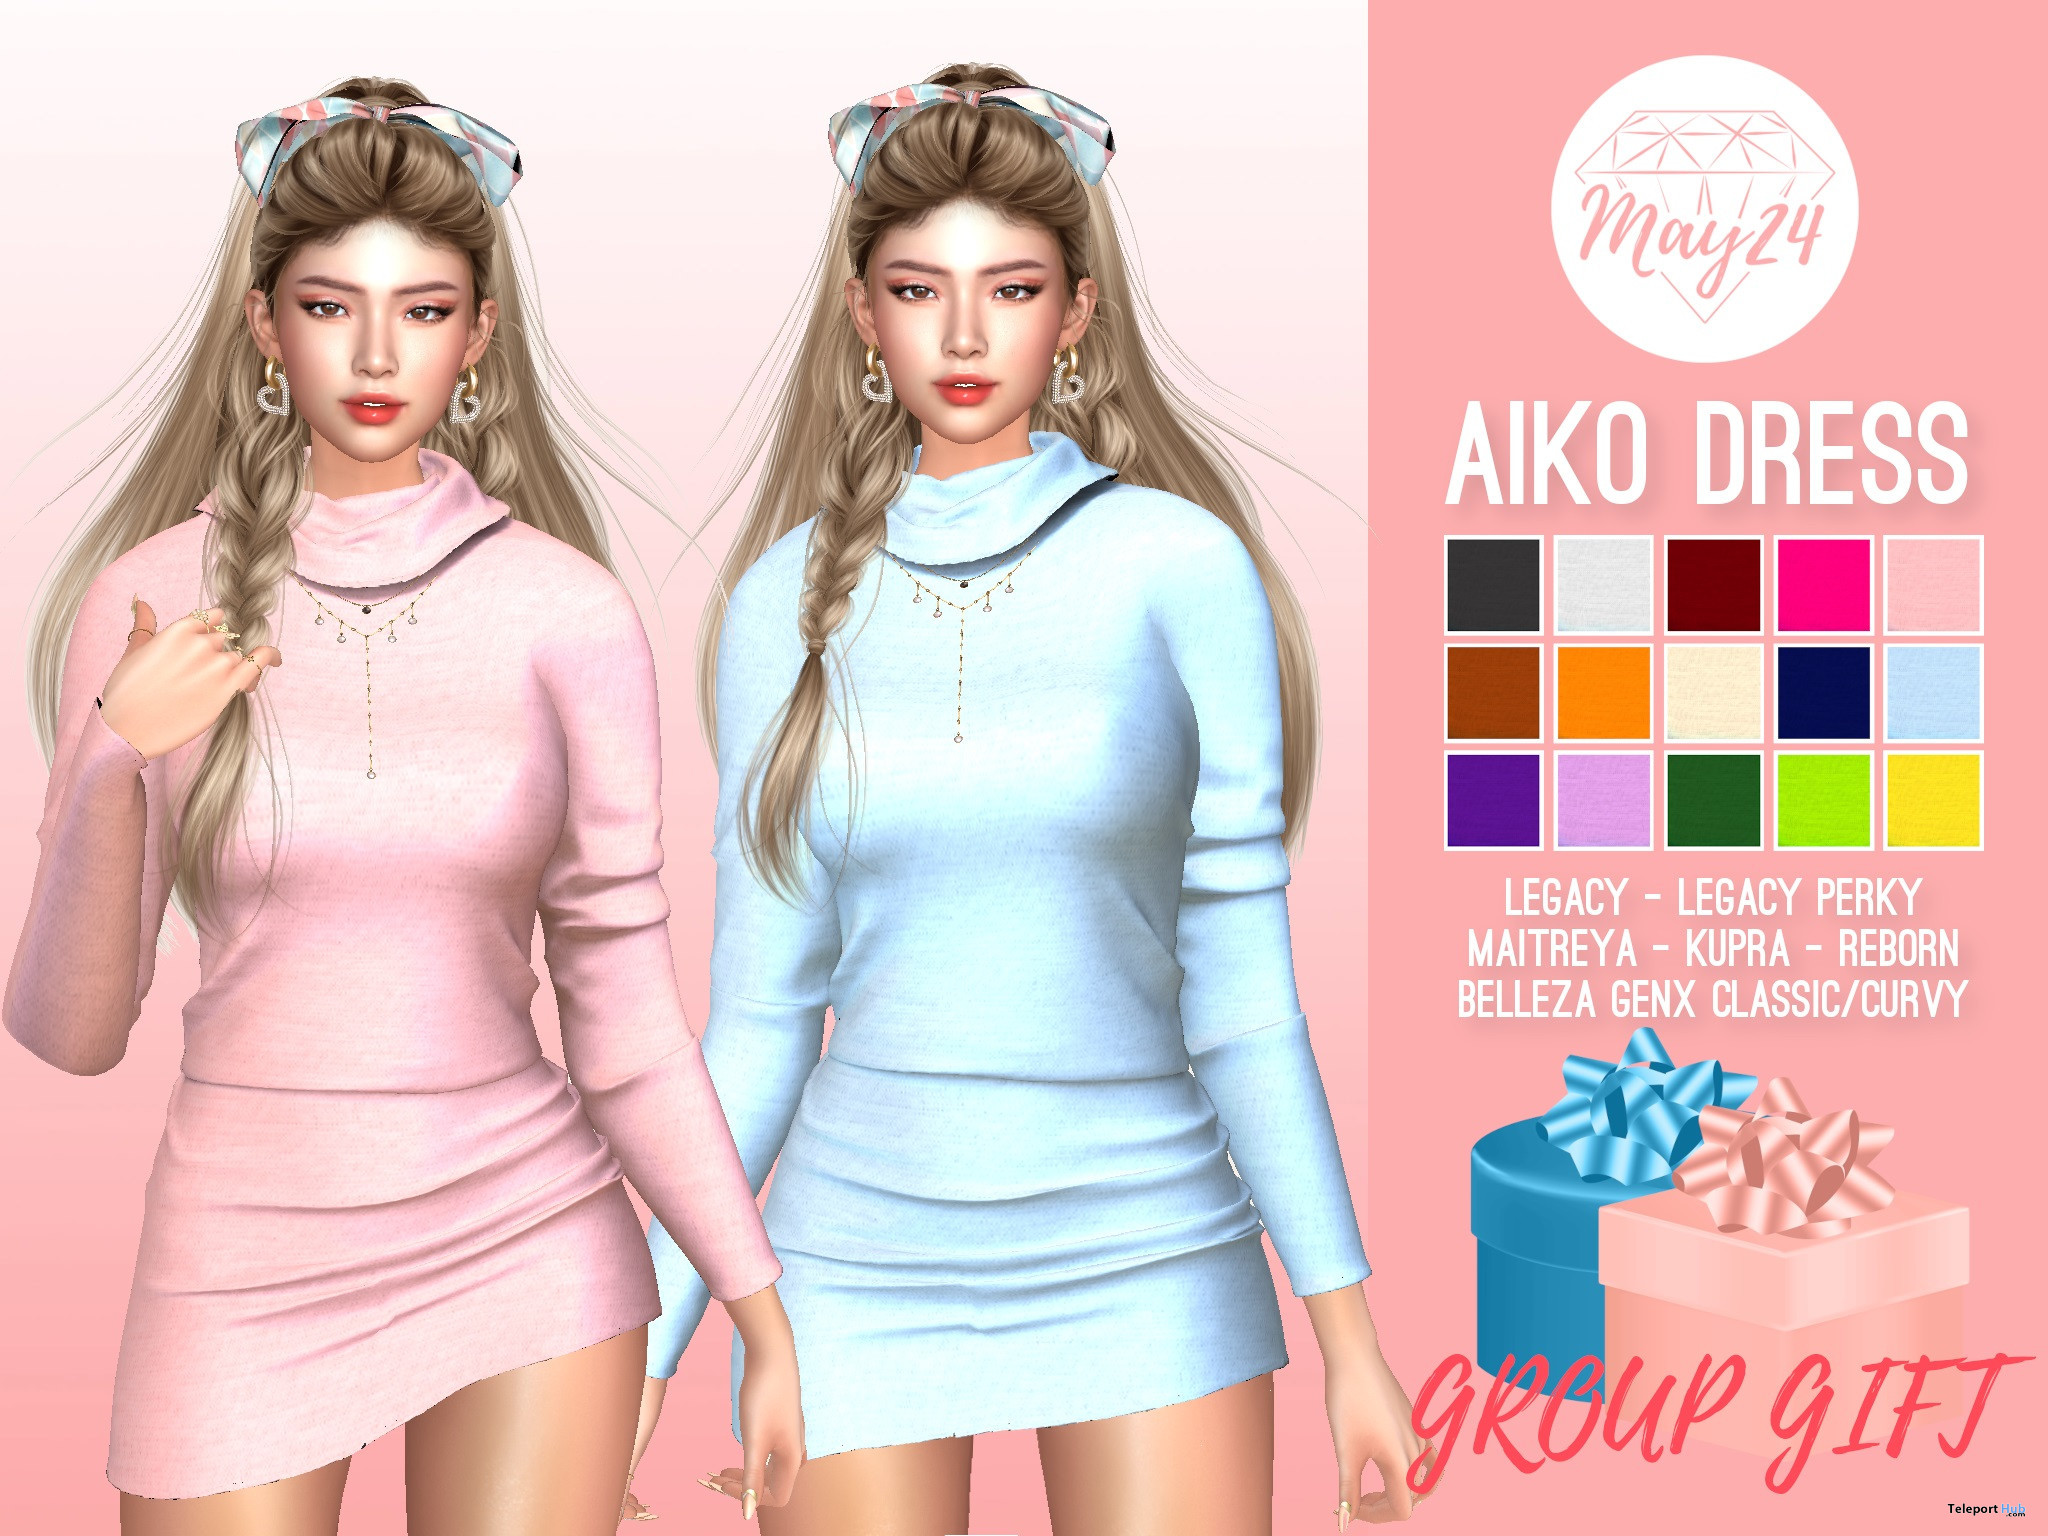 Aiko Dress October 2023 Group Gift by May24 - Teleport Hub - teleporthub.com